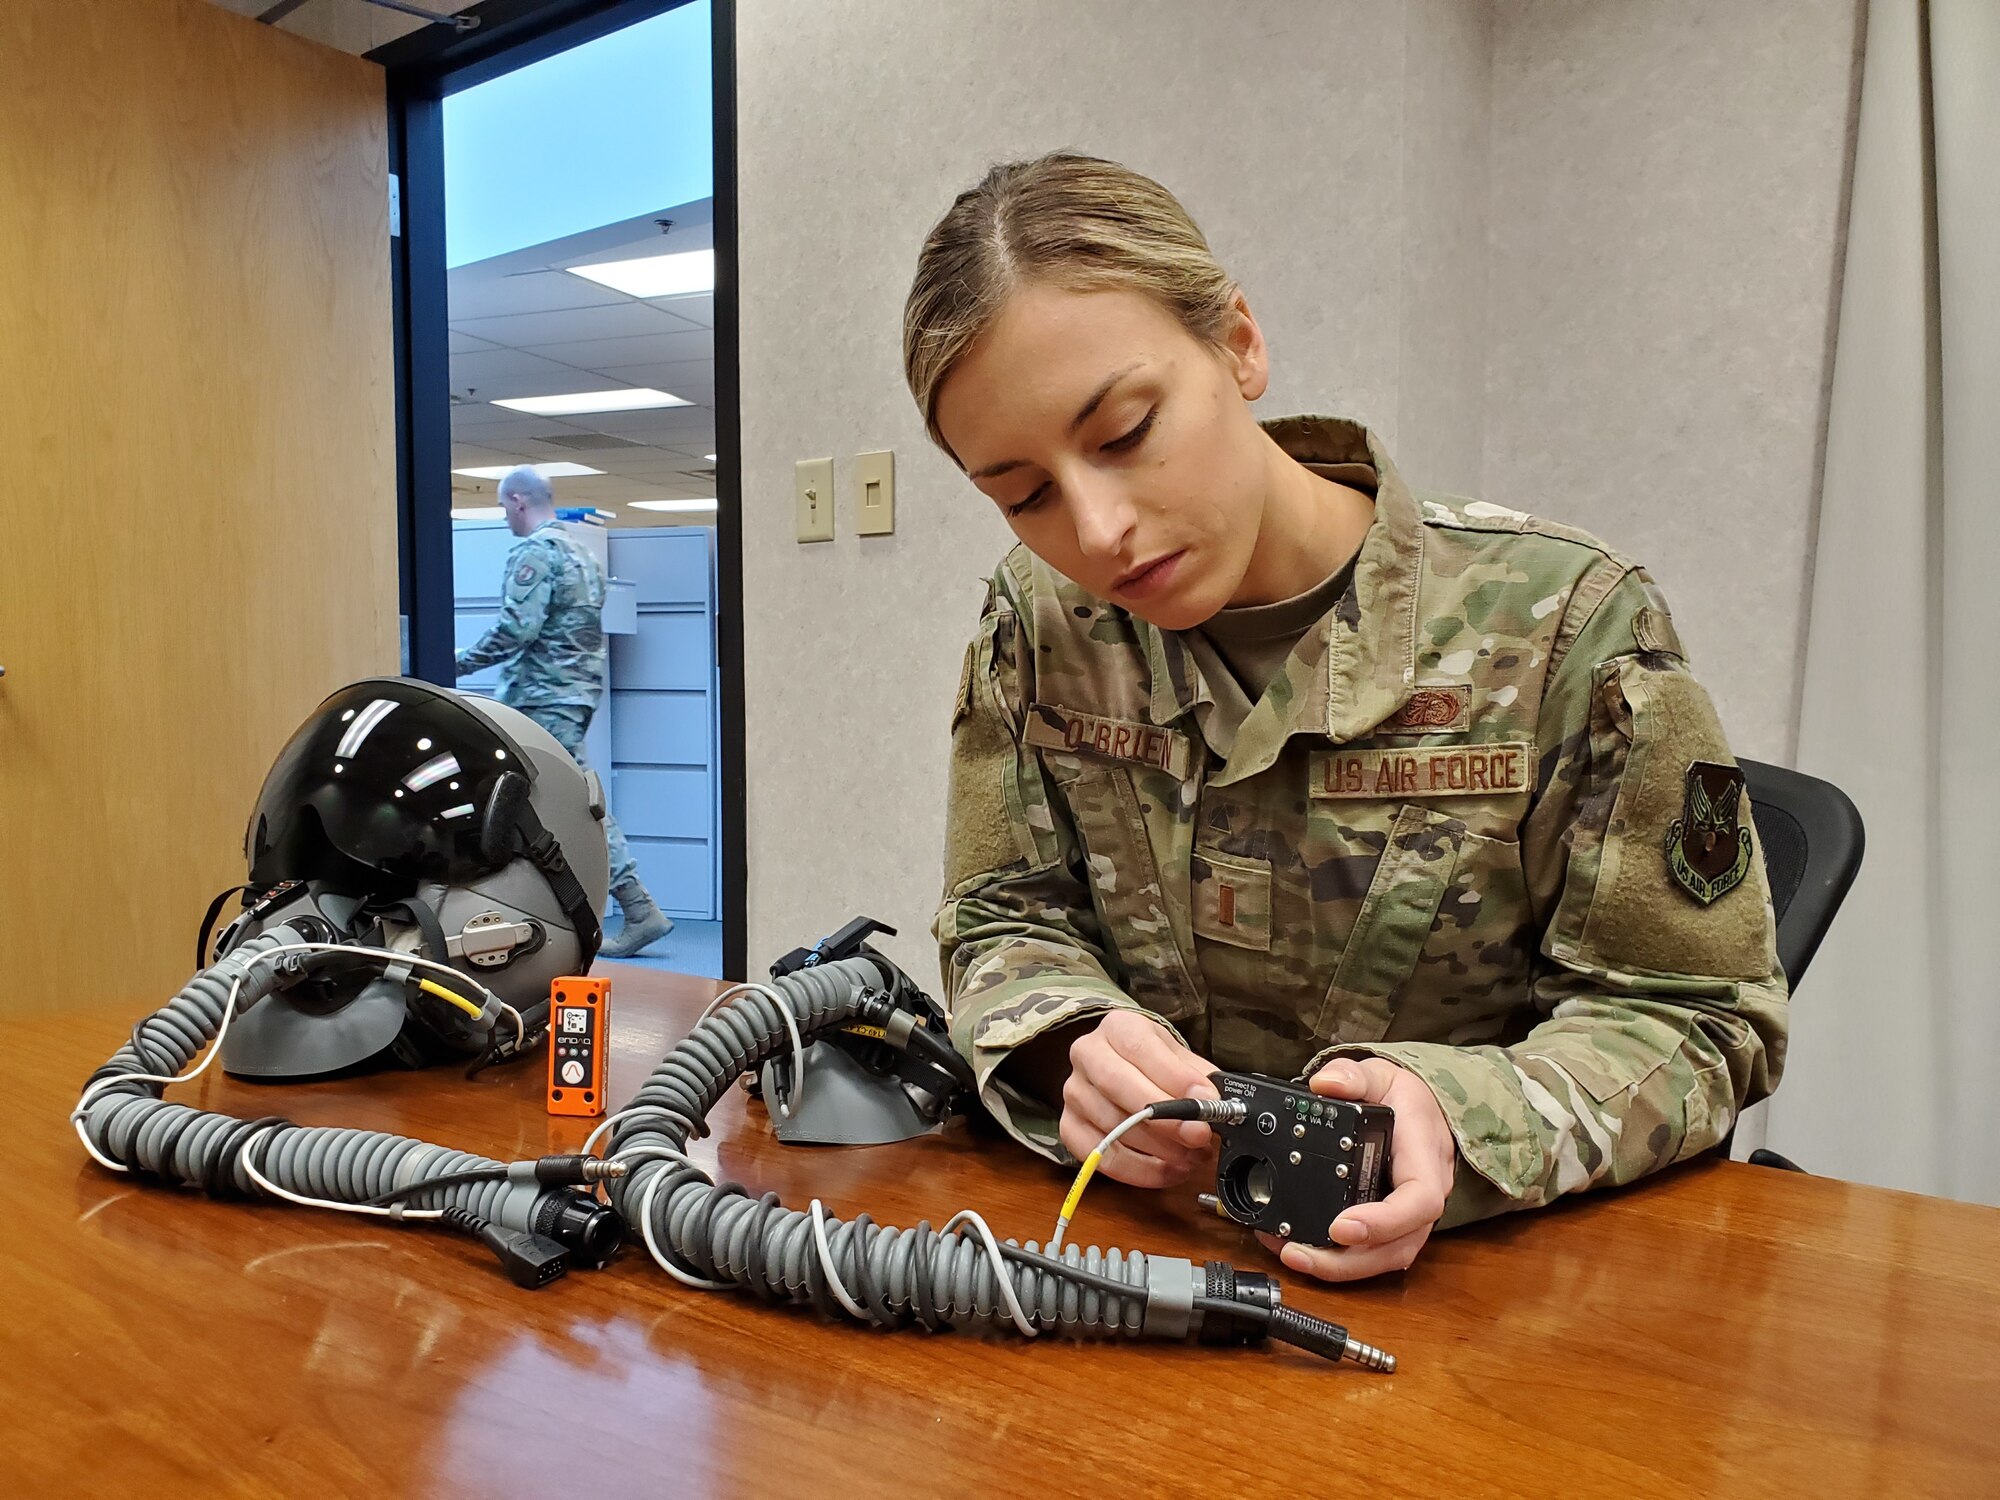 2nd Lt. (Dr.) Dominique O’Brien, Project Lead, Airman Sensing and Assessment Product Line, with the 711th Human Performance Wing’s Airman Systems Directorate, displays two devices her team used during flight tests in support of a request from the 20th Fighter Wing to provide assistance with assessing cabin pressure, oxygen concentrations, and possible hypoxia-like symptoms reported by their F-16 pilots. One device is called the “Slam Stick,” (orange in color), which measures tri-axial acceleration – or acceleration in all three axes, X, Y, and Z. The second device is called the Insta Pilot Breath Air Monitor, or IPBAM, (black device being held by Lt. O’Brien) which measures several critical parameters of the breathing gas delivered to the pilot. (U.S. Air Force photo/Bryan Ripple)